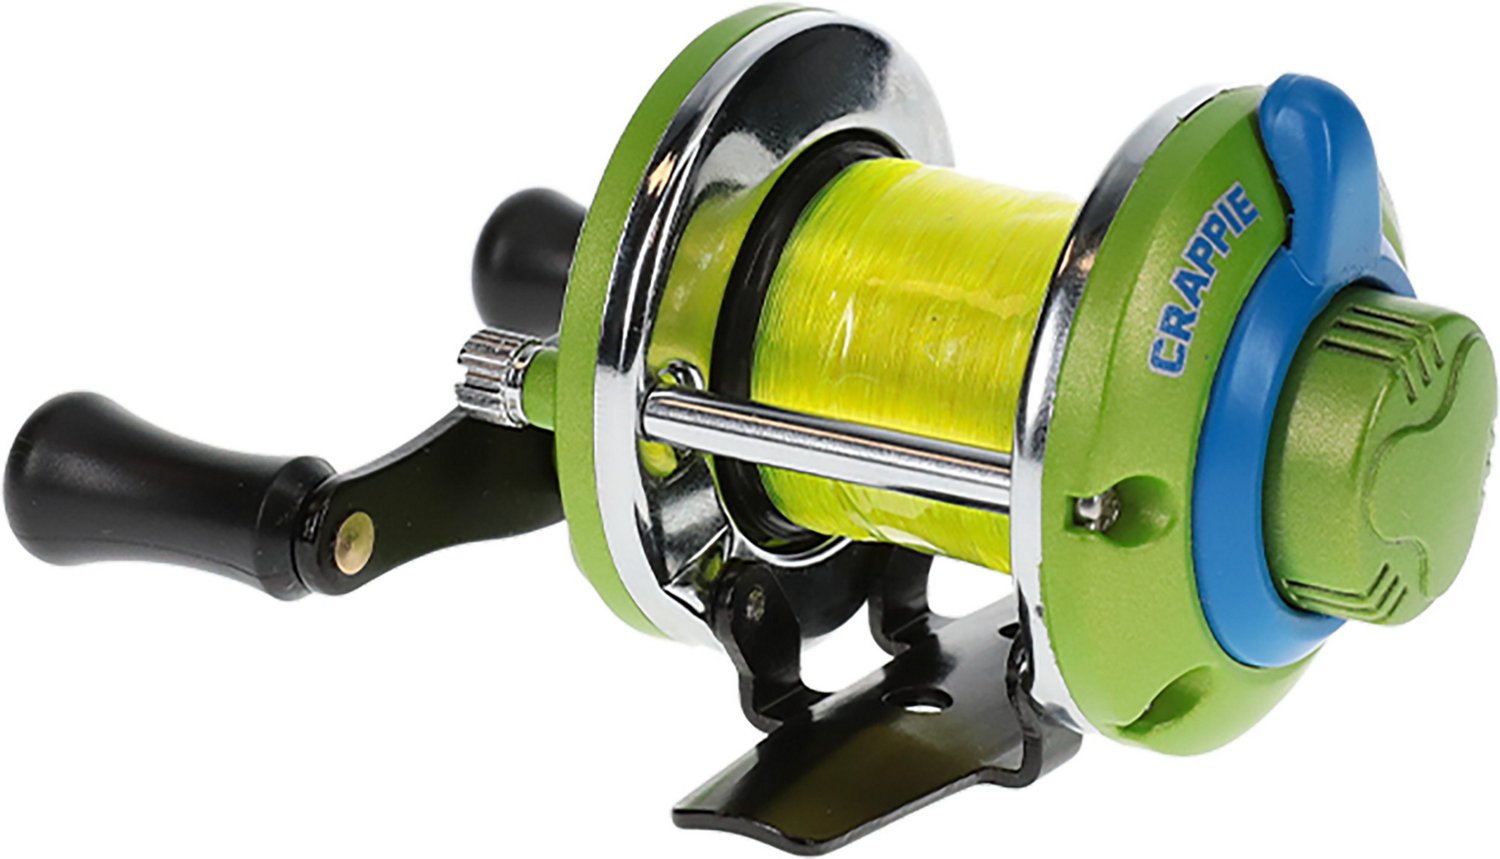 Crappie Thunder Jigging And Trolling Reel